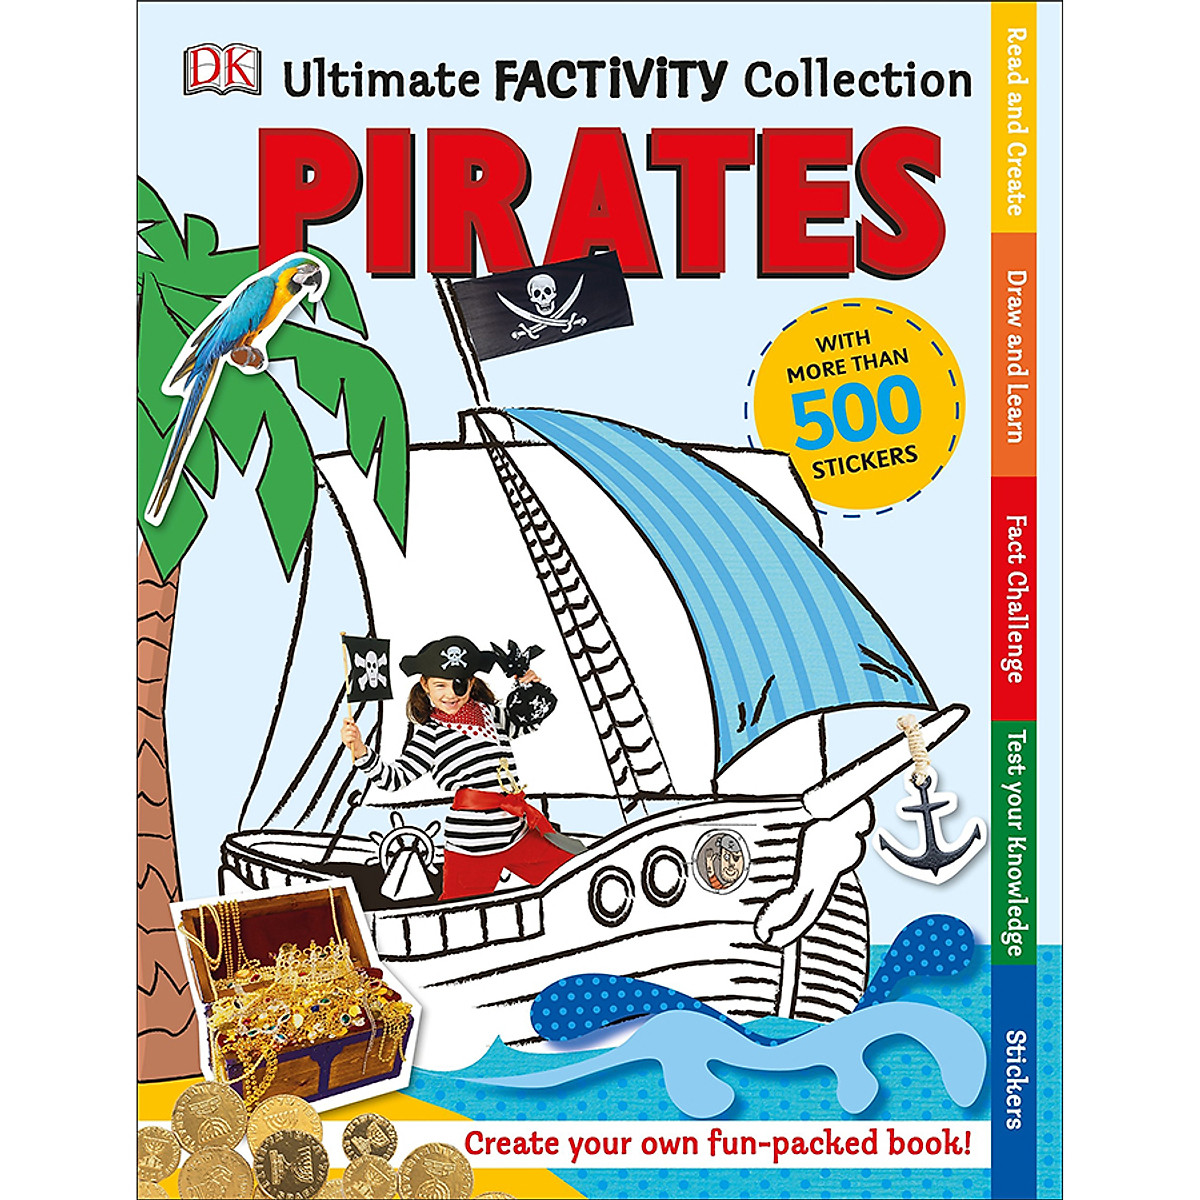 [Hàng thanh lý miễn đổi trả] Ultimate Factivity Collection Pirates: Create Your Own Fun Packed Book